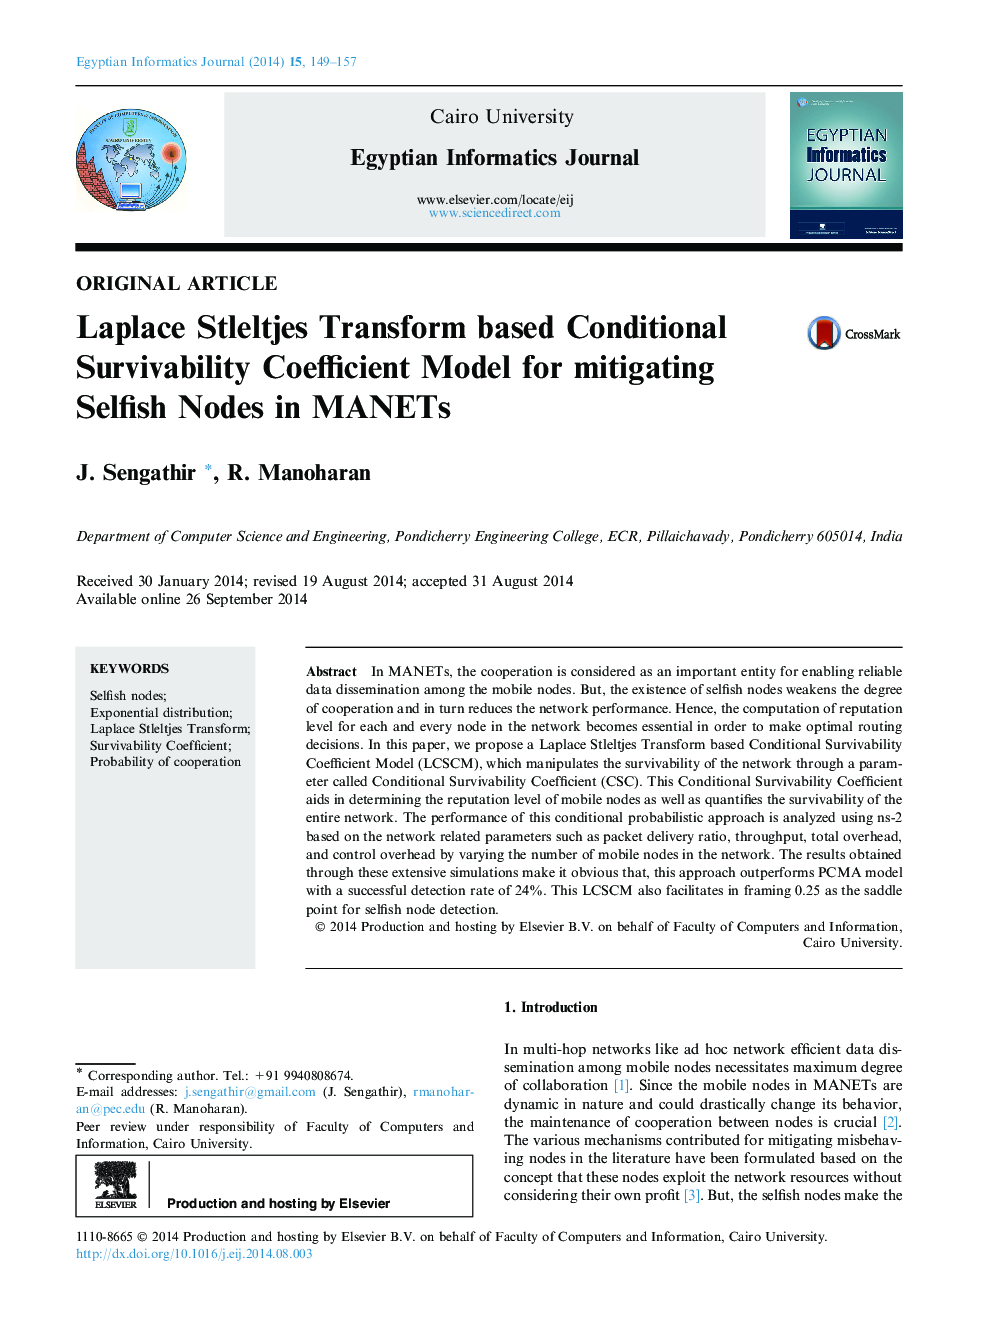 Laplace Stleltjes Transform based Conditional Survivability Coefficient Model for mitigating Selfish Nodes in MANETs 